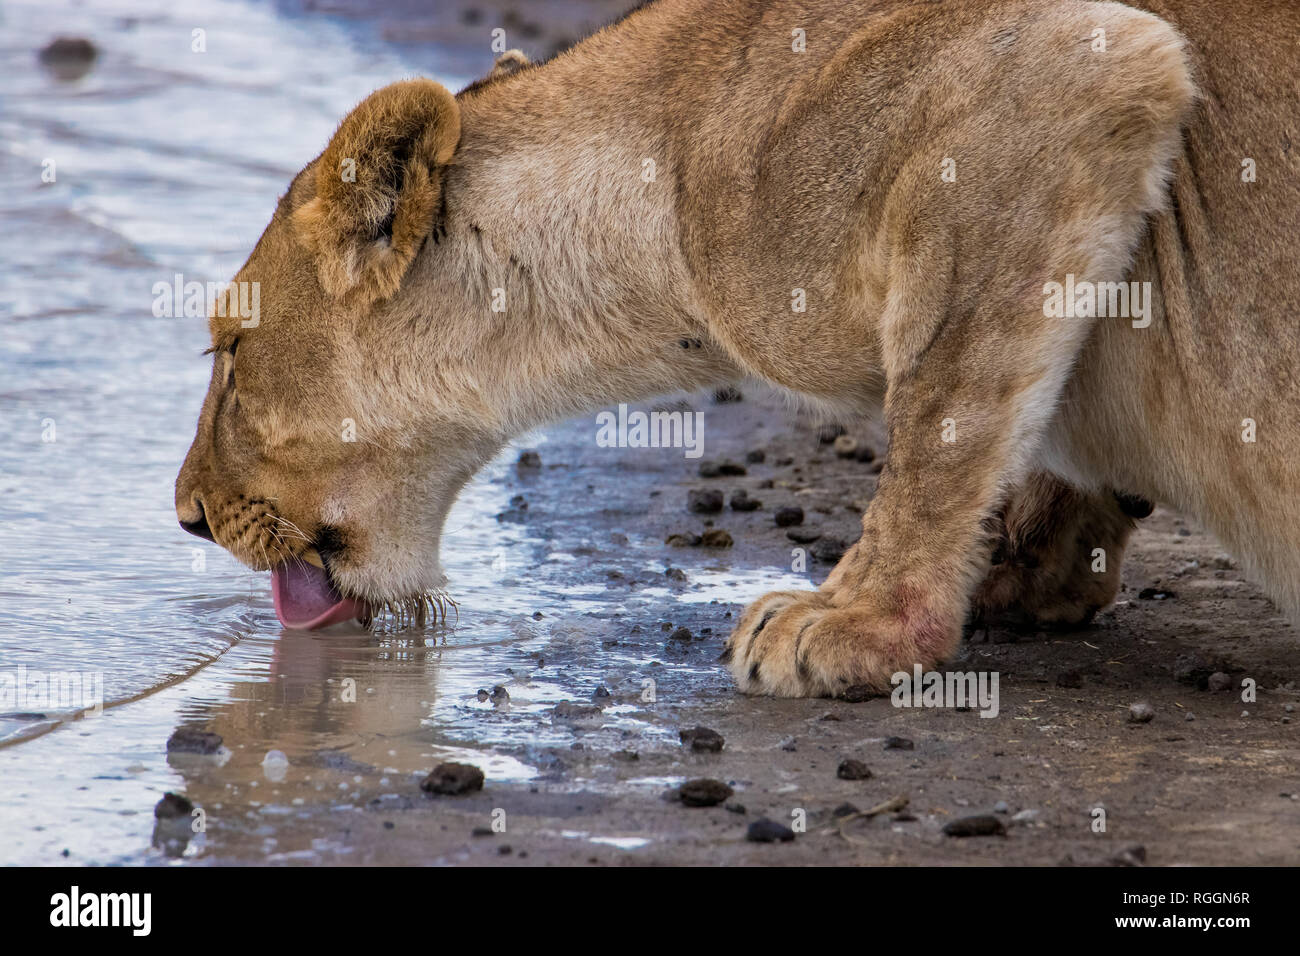 Lioness drinks water from the puddle Stock Photo